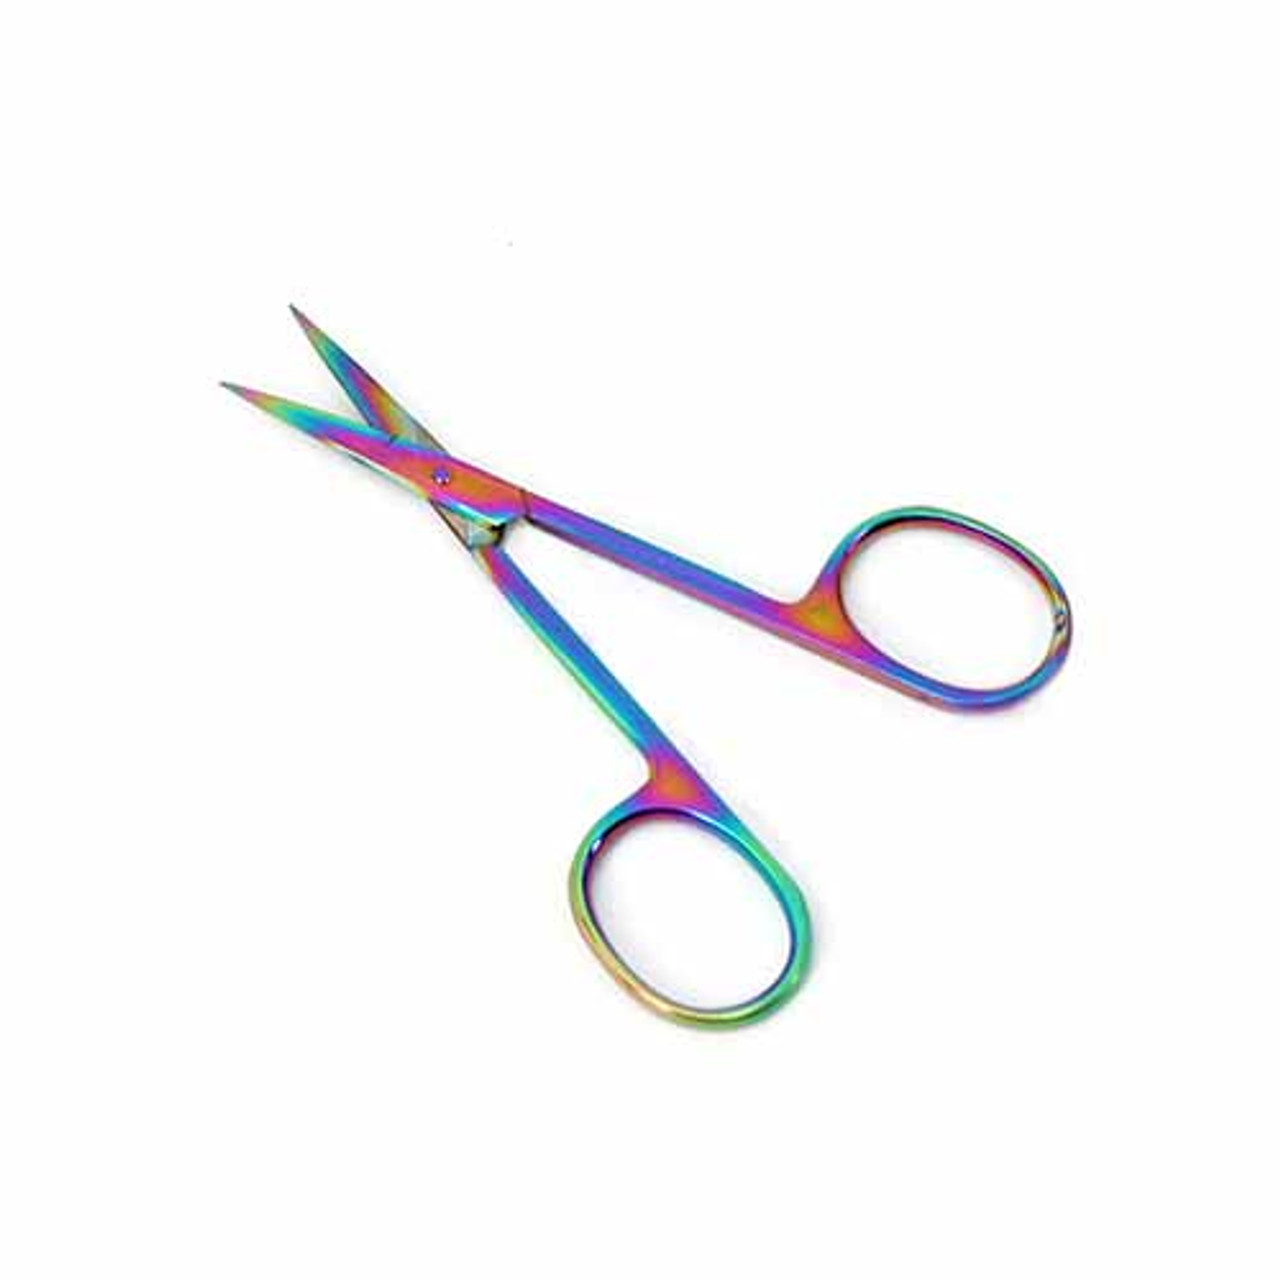 Cosmetic Multi Color Stainless Steel Scissors